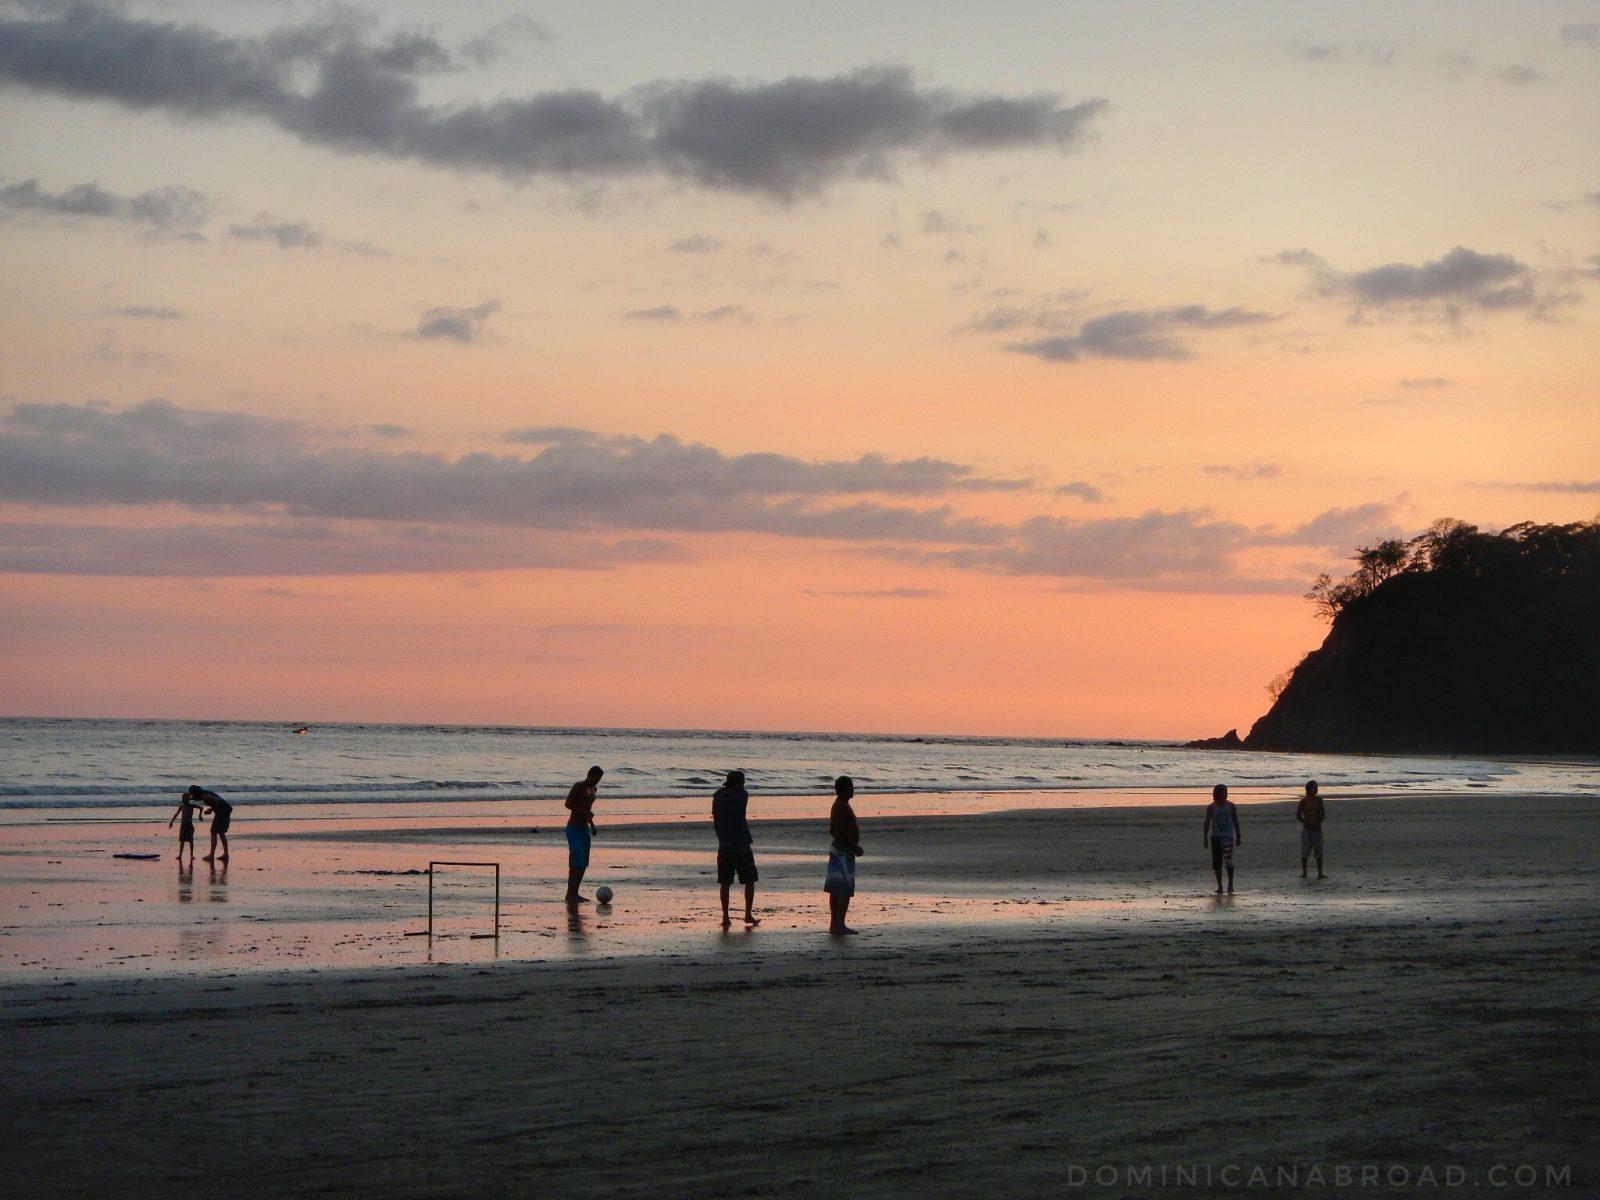 Silhouettes of people at a beach in Costa Rica at sunset.